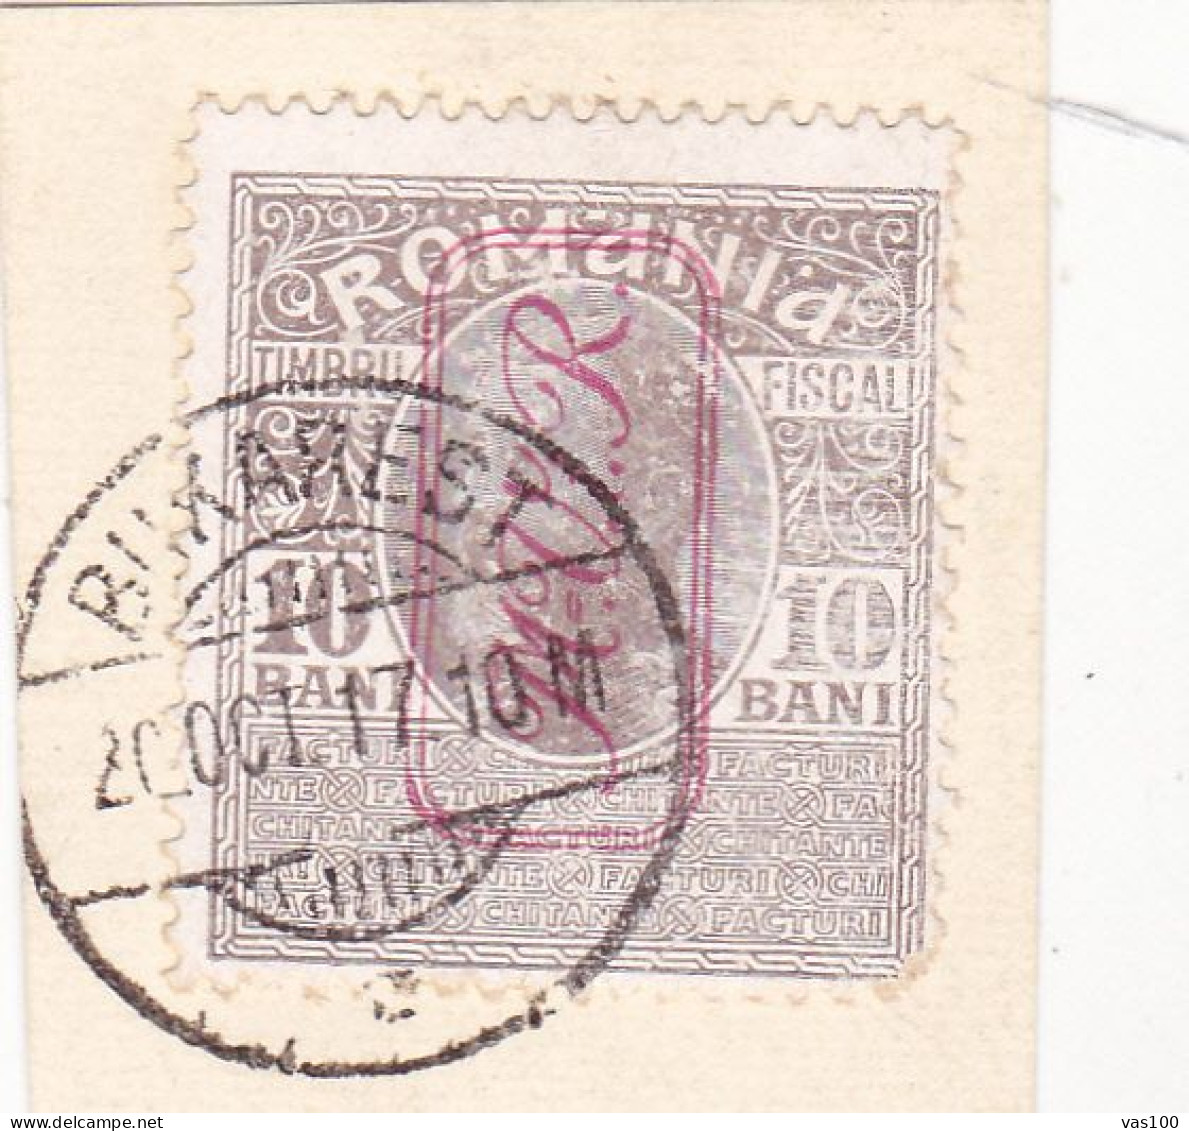 Germany WW1 Occupation In Romania 1917 MViR 10 BANI FISCAL POSTAGE USED FRAGMENT RARE! - Occupazione